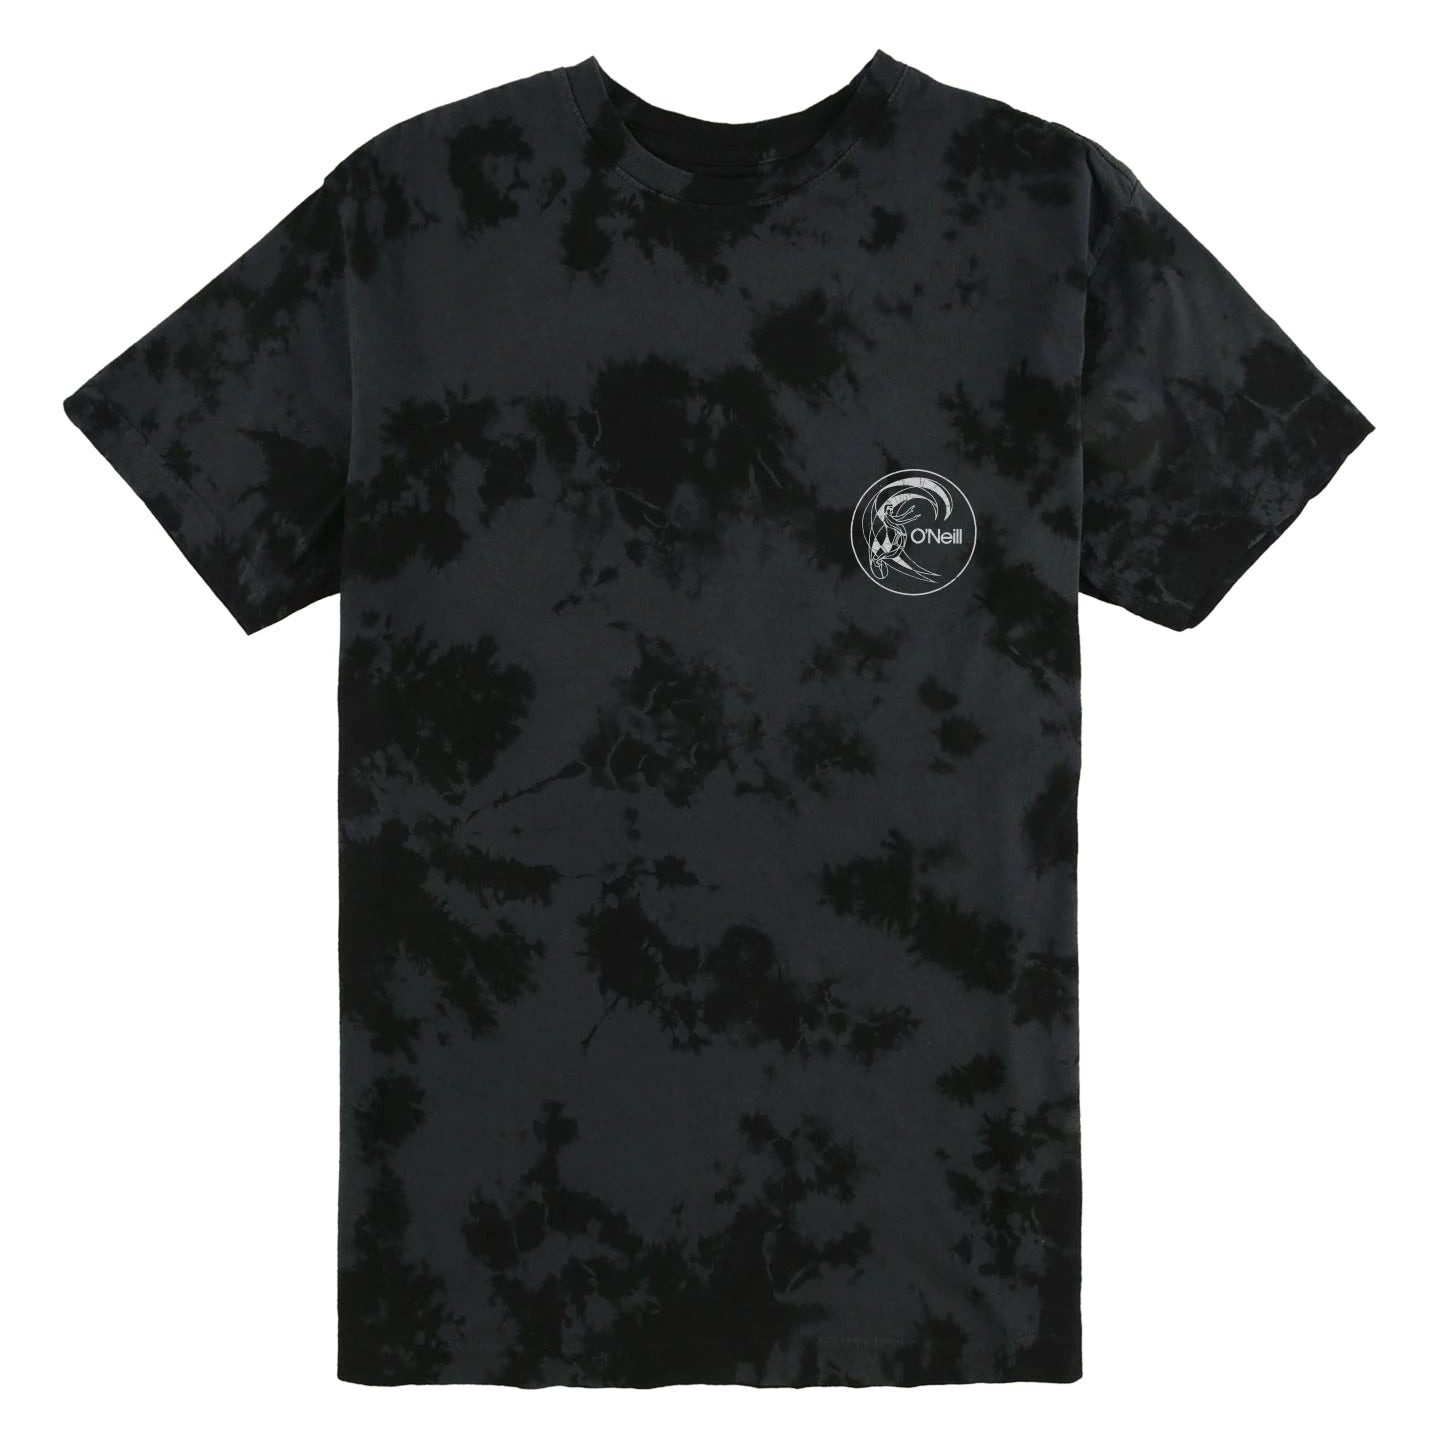 O'neill Psyched Tee DCH-DarkCharcoal S